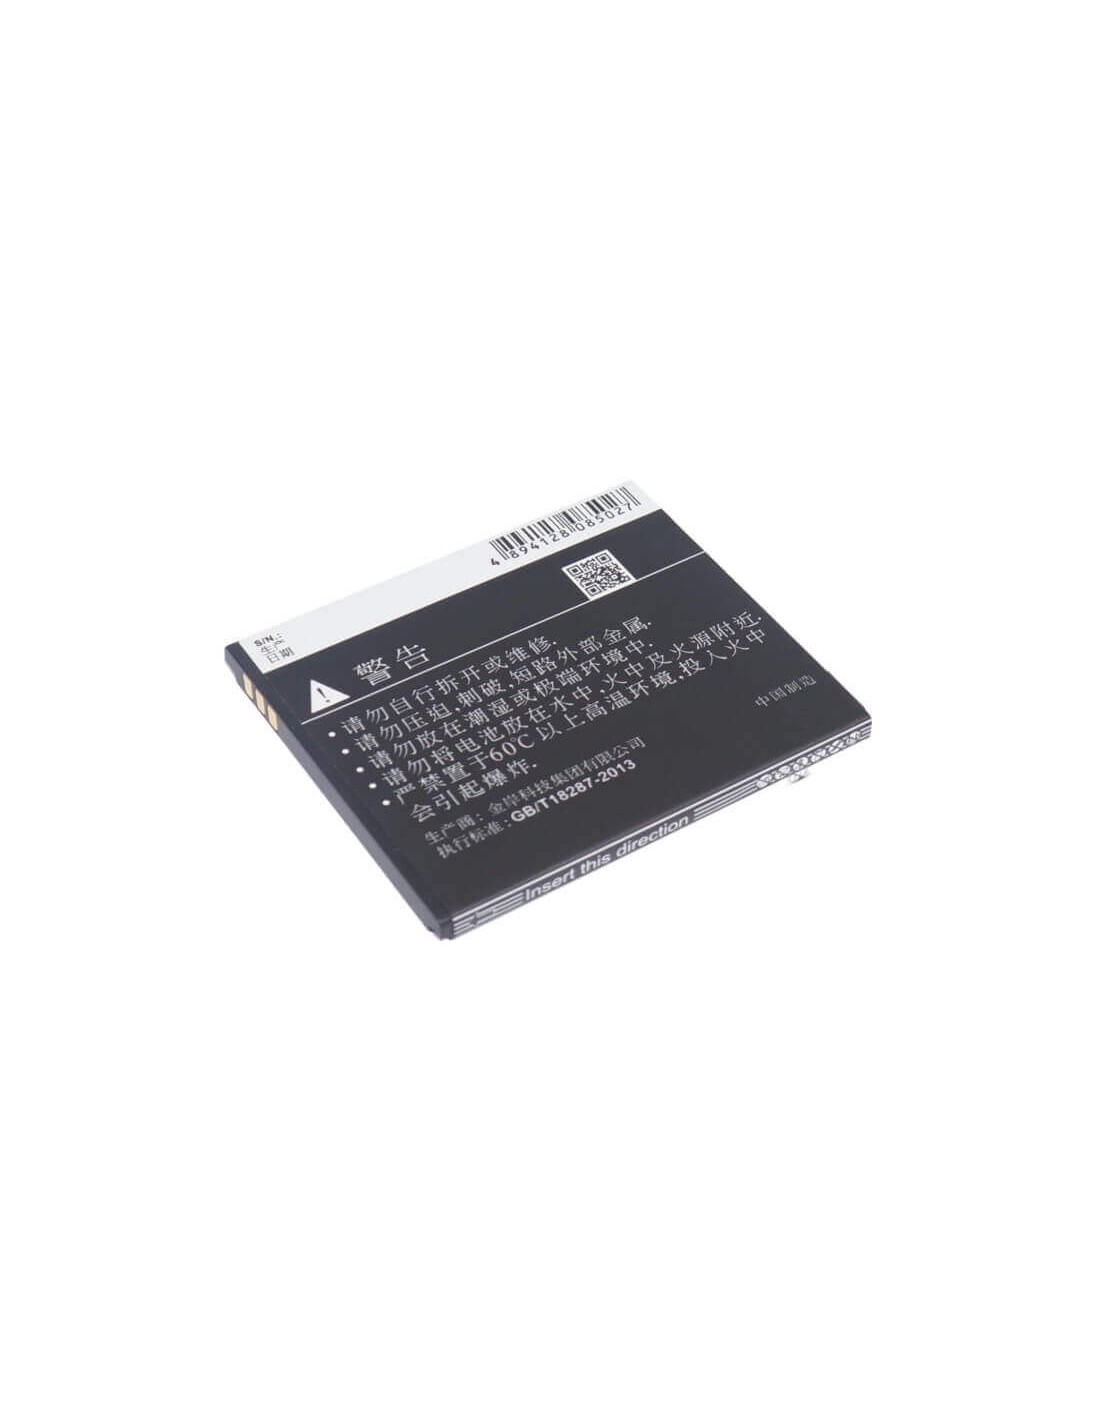 Battery for Coolpad 5876, 5890, 7260S 3.7V, 1250mAh - 4.63Wh